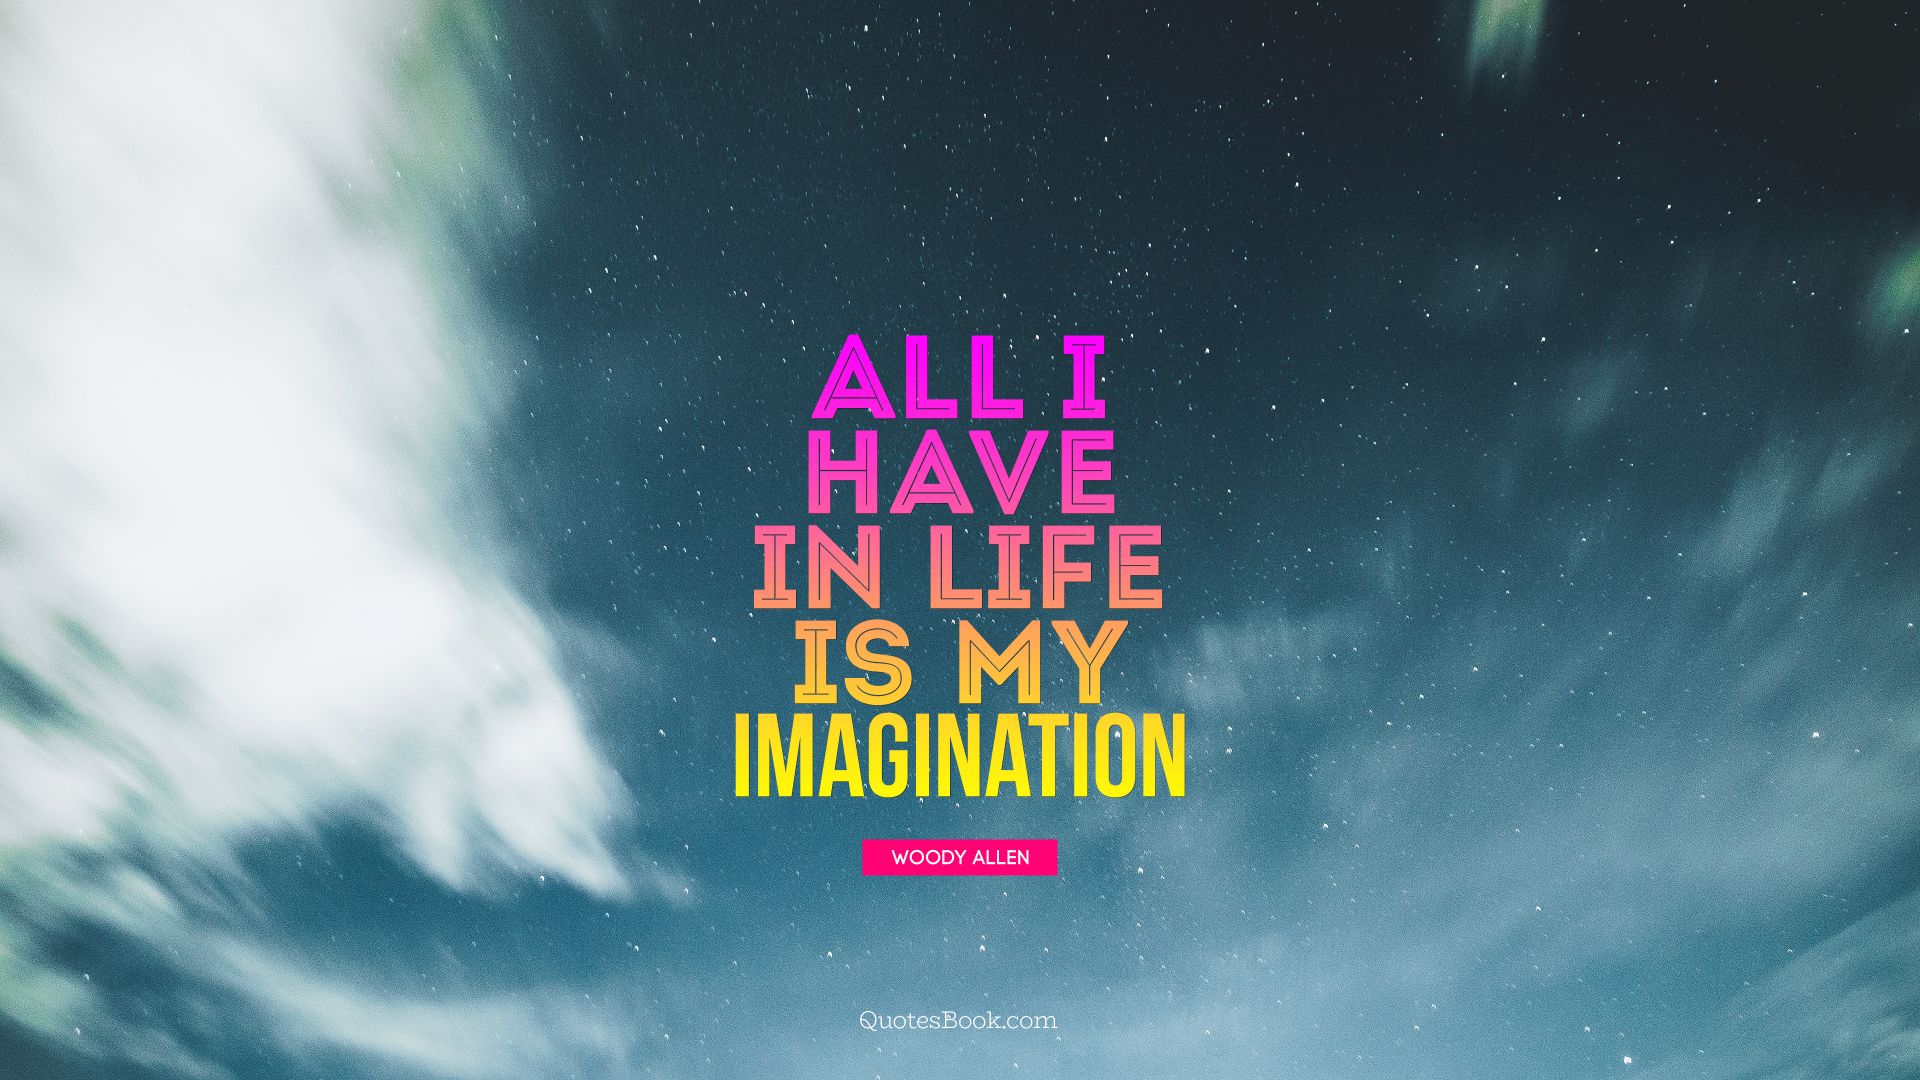 All i have in life is my Imagination. - Quote by Woody Allen